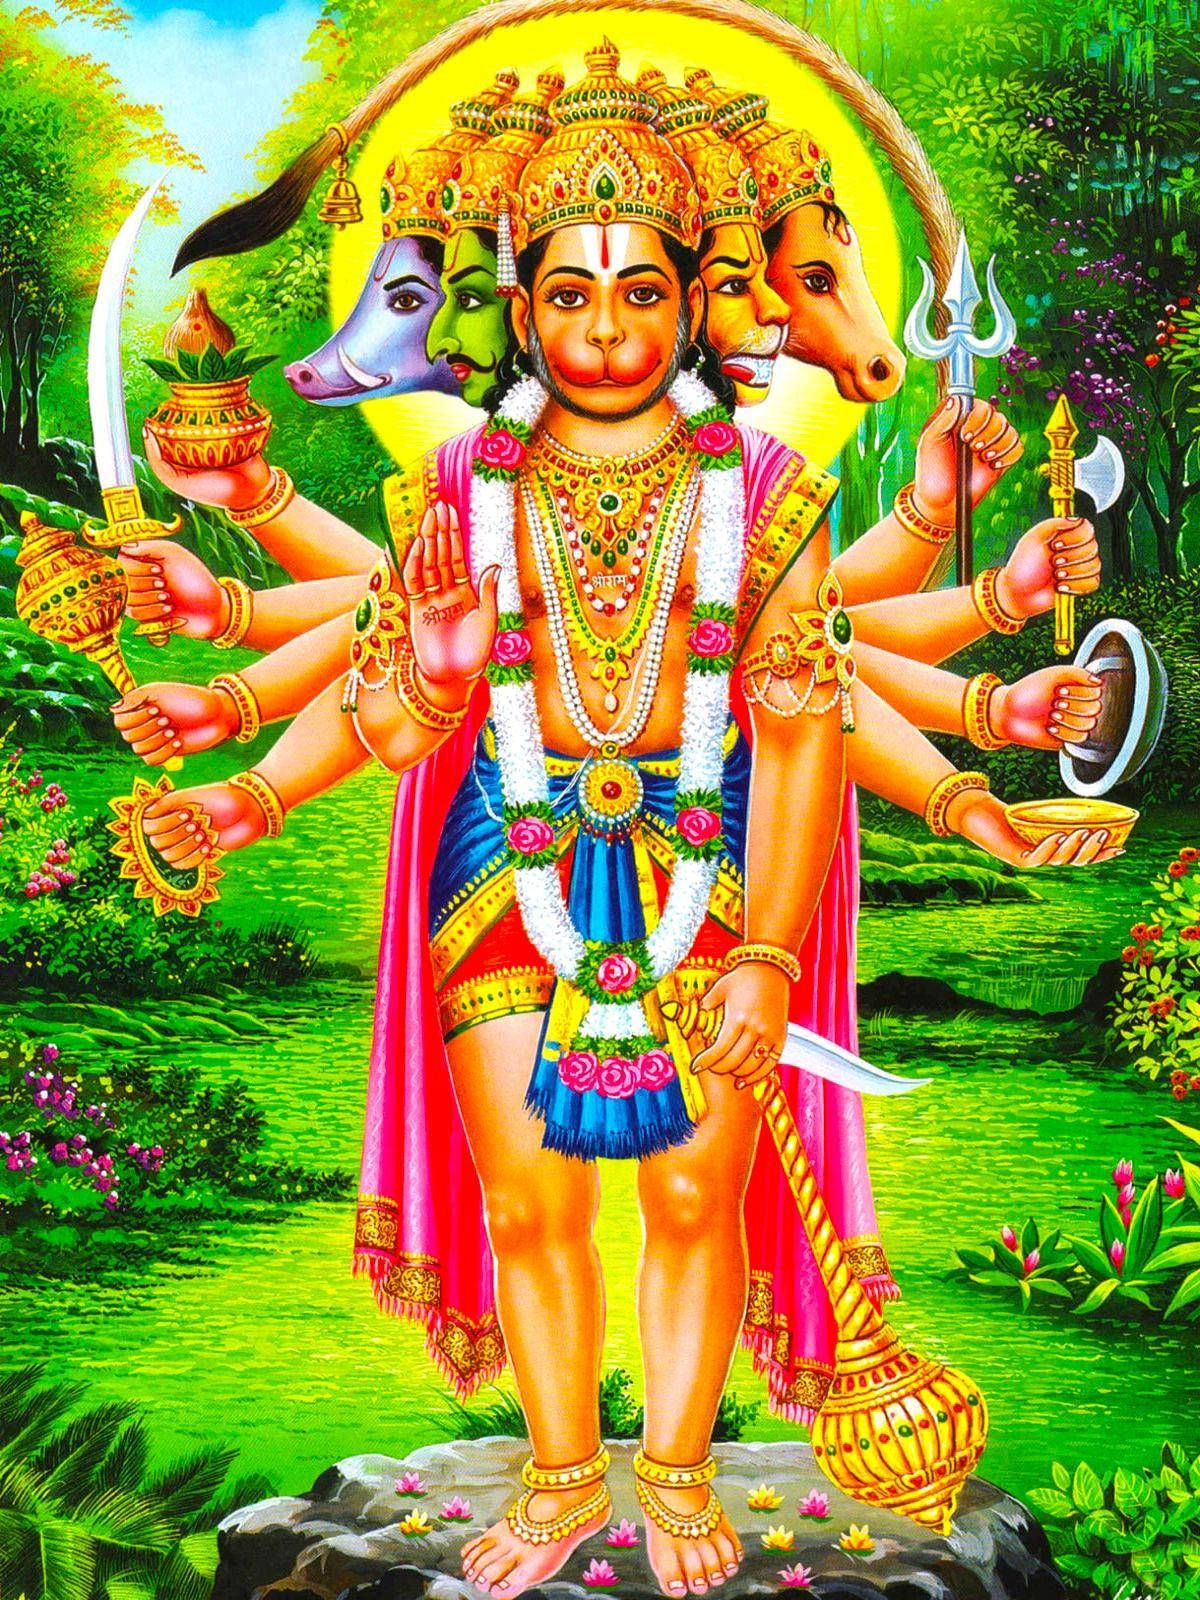 Hindu God Wallpapers HD:Amazon.co.uk:Appstore for Android